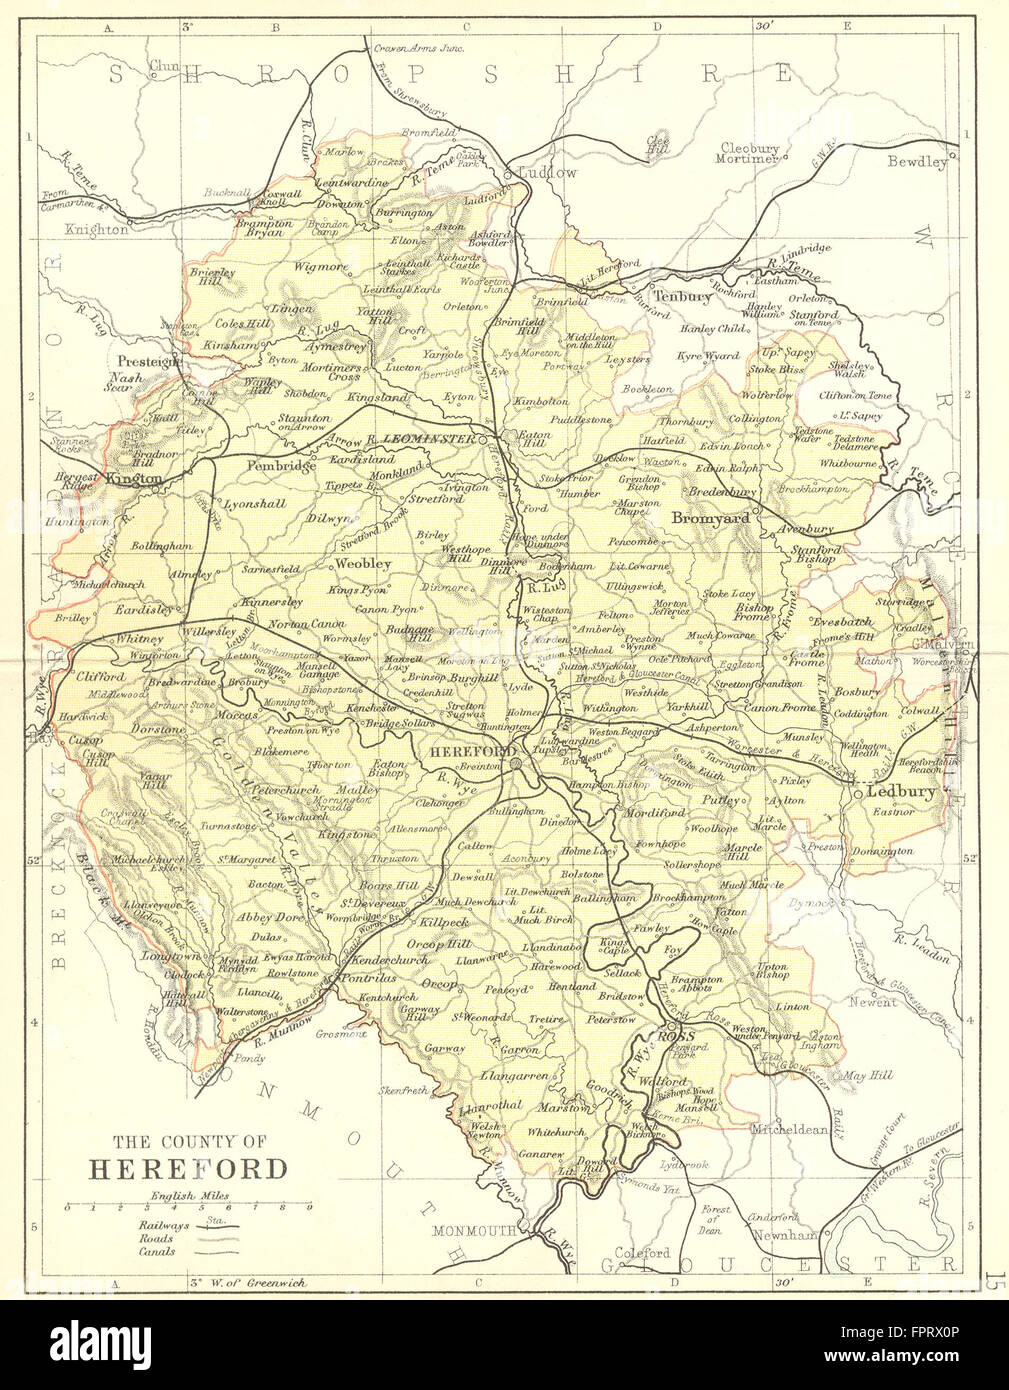 HEREFORD: Philip, 1876 antique map Stock Photo